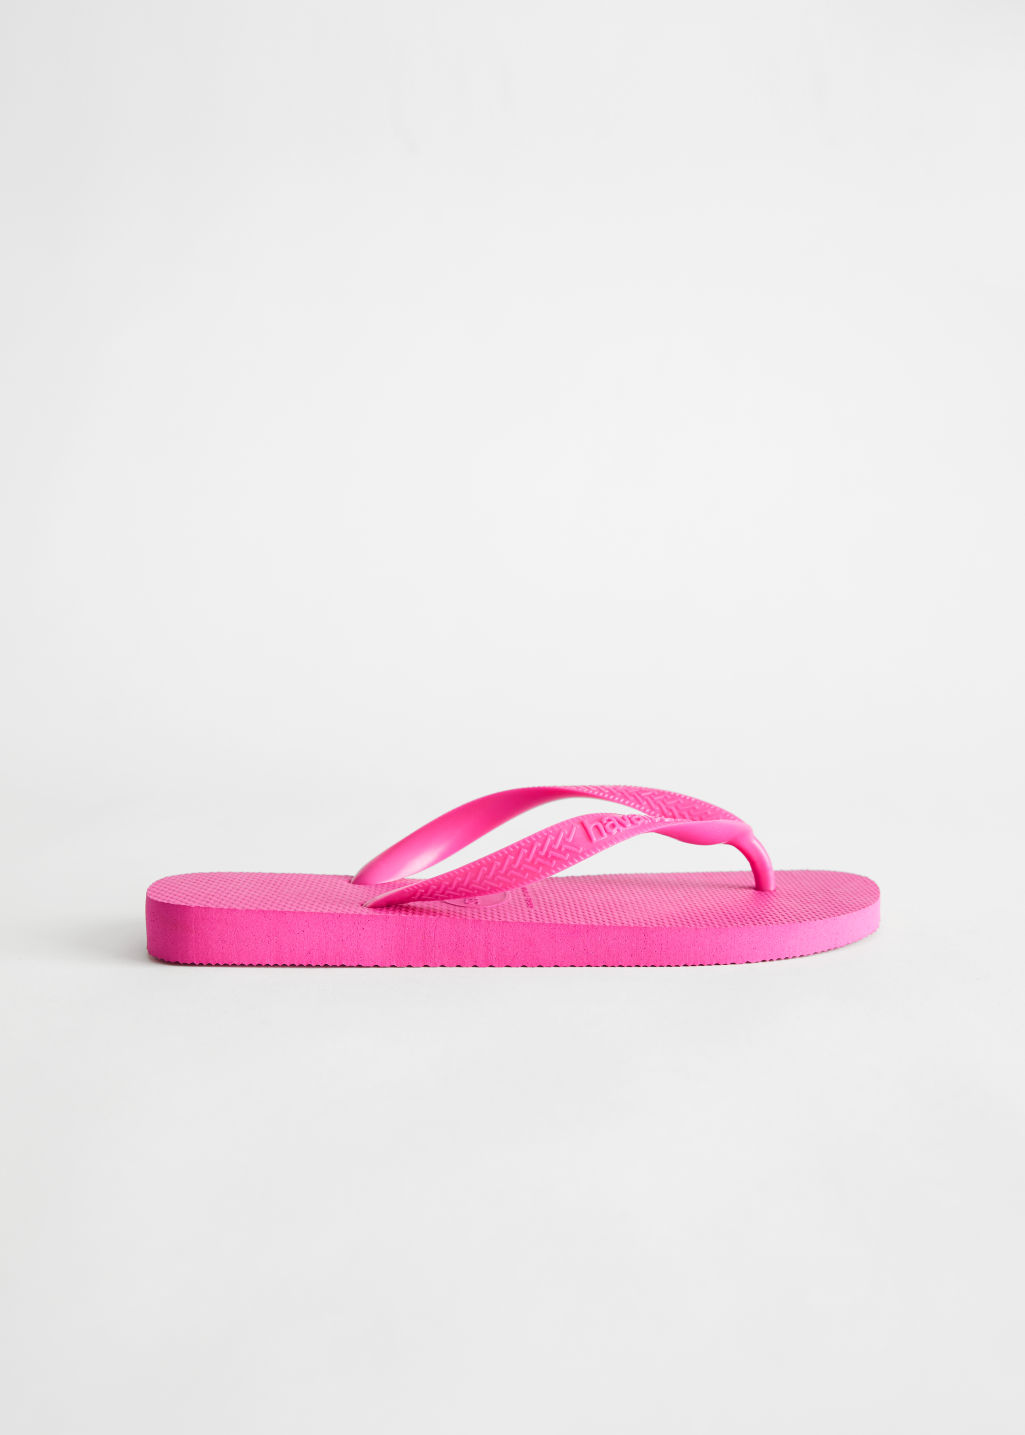 Havaianas Top Flip Flops - Pink - Havaianas - & Other Stories - Click Image to Close